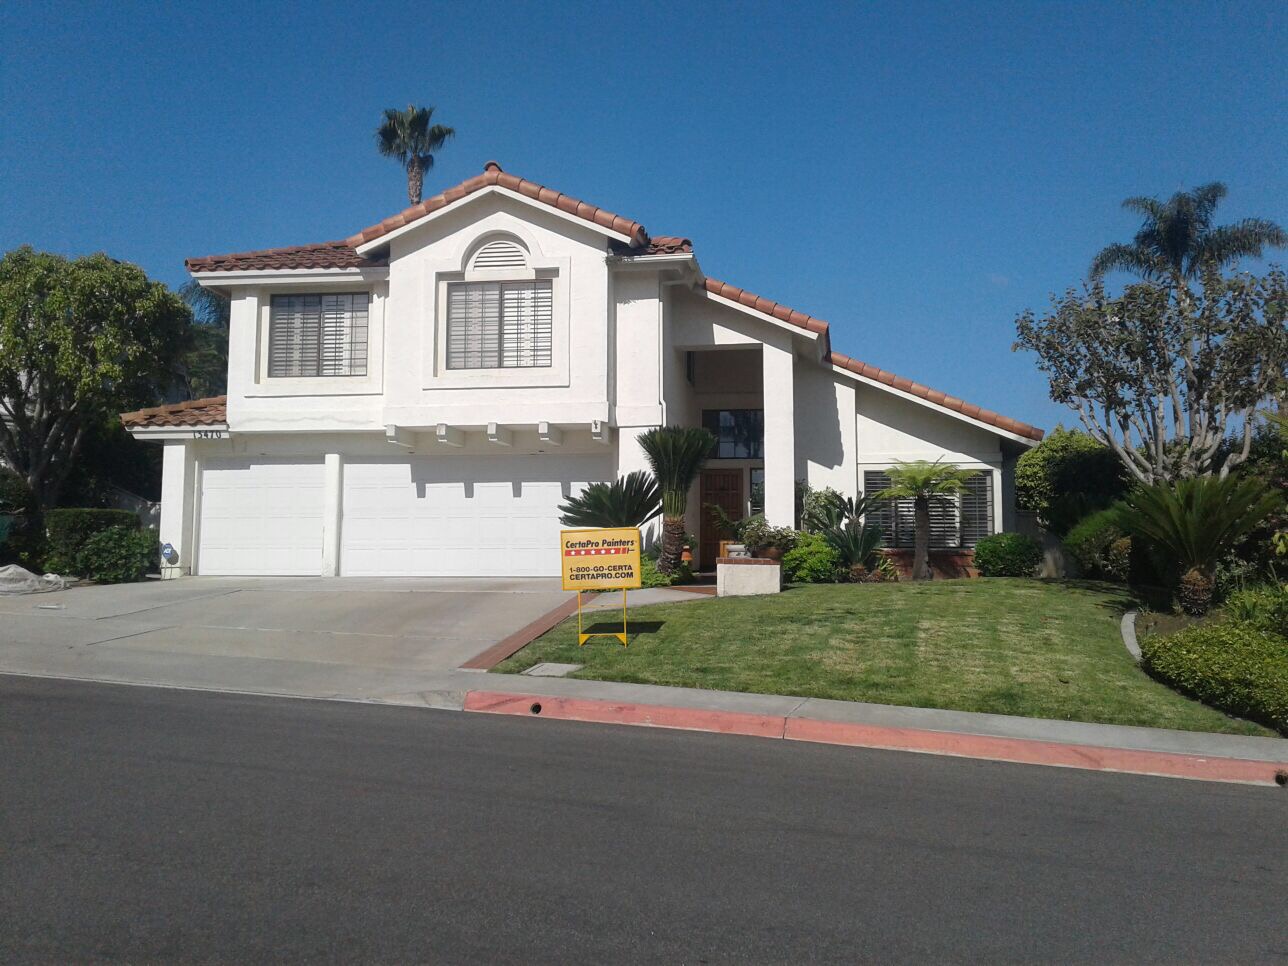 CertaPro Painters in Carmel Valley, CA are your Exterior painting experts